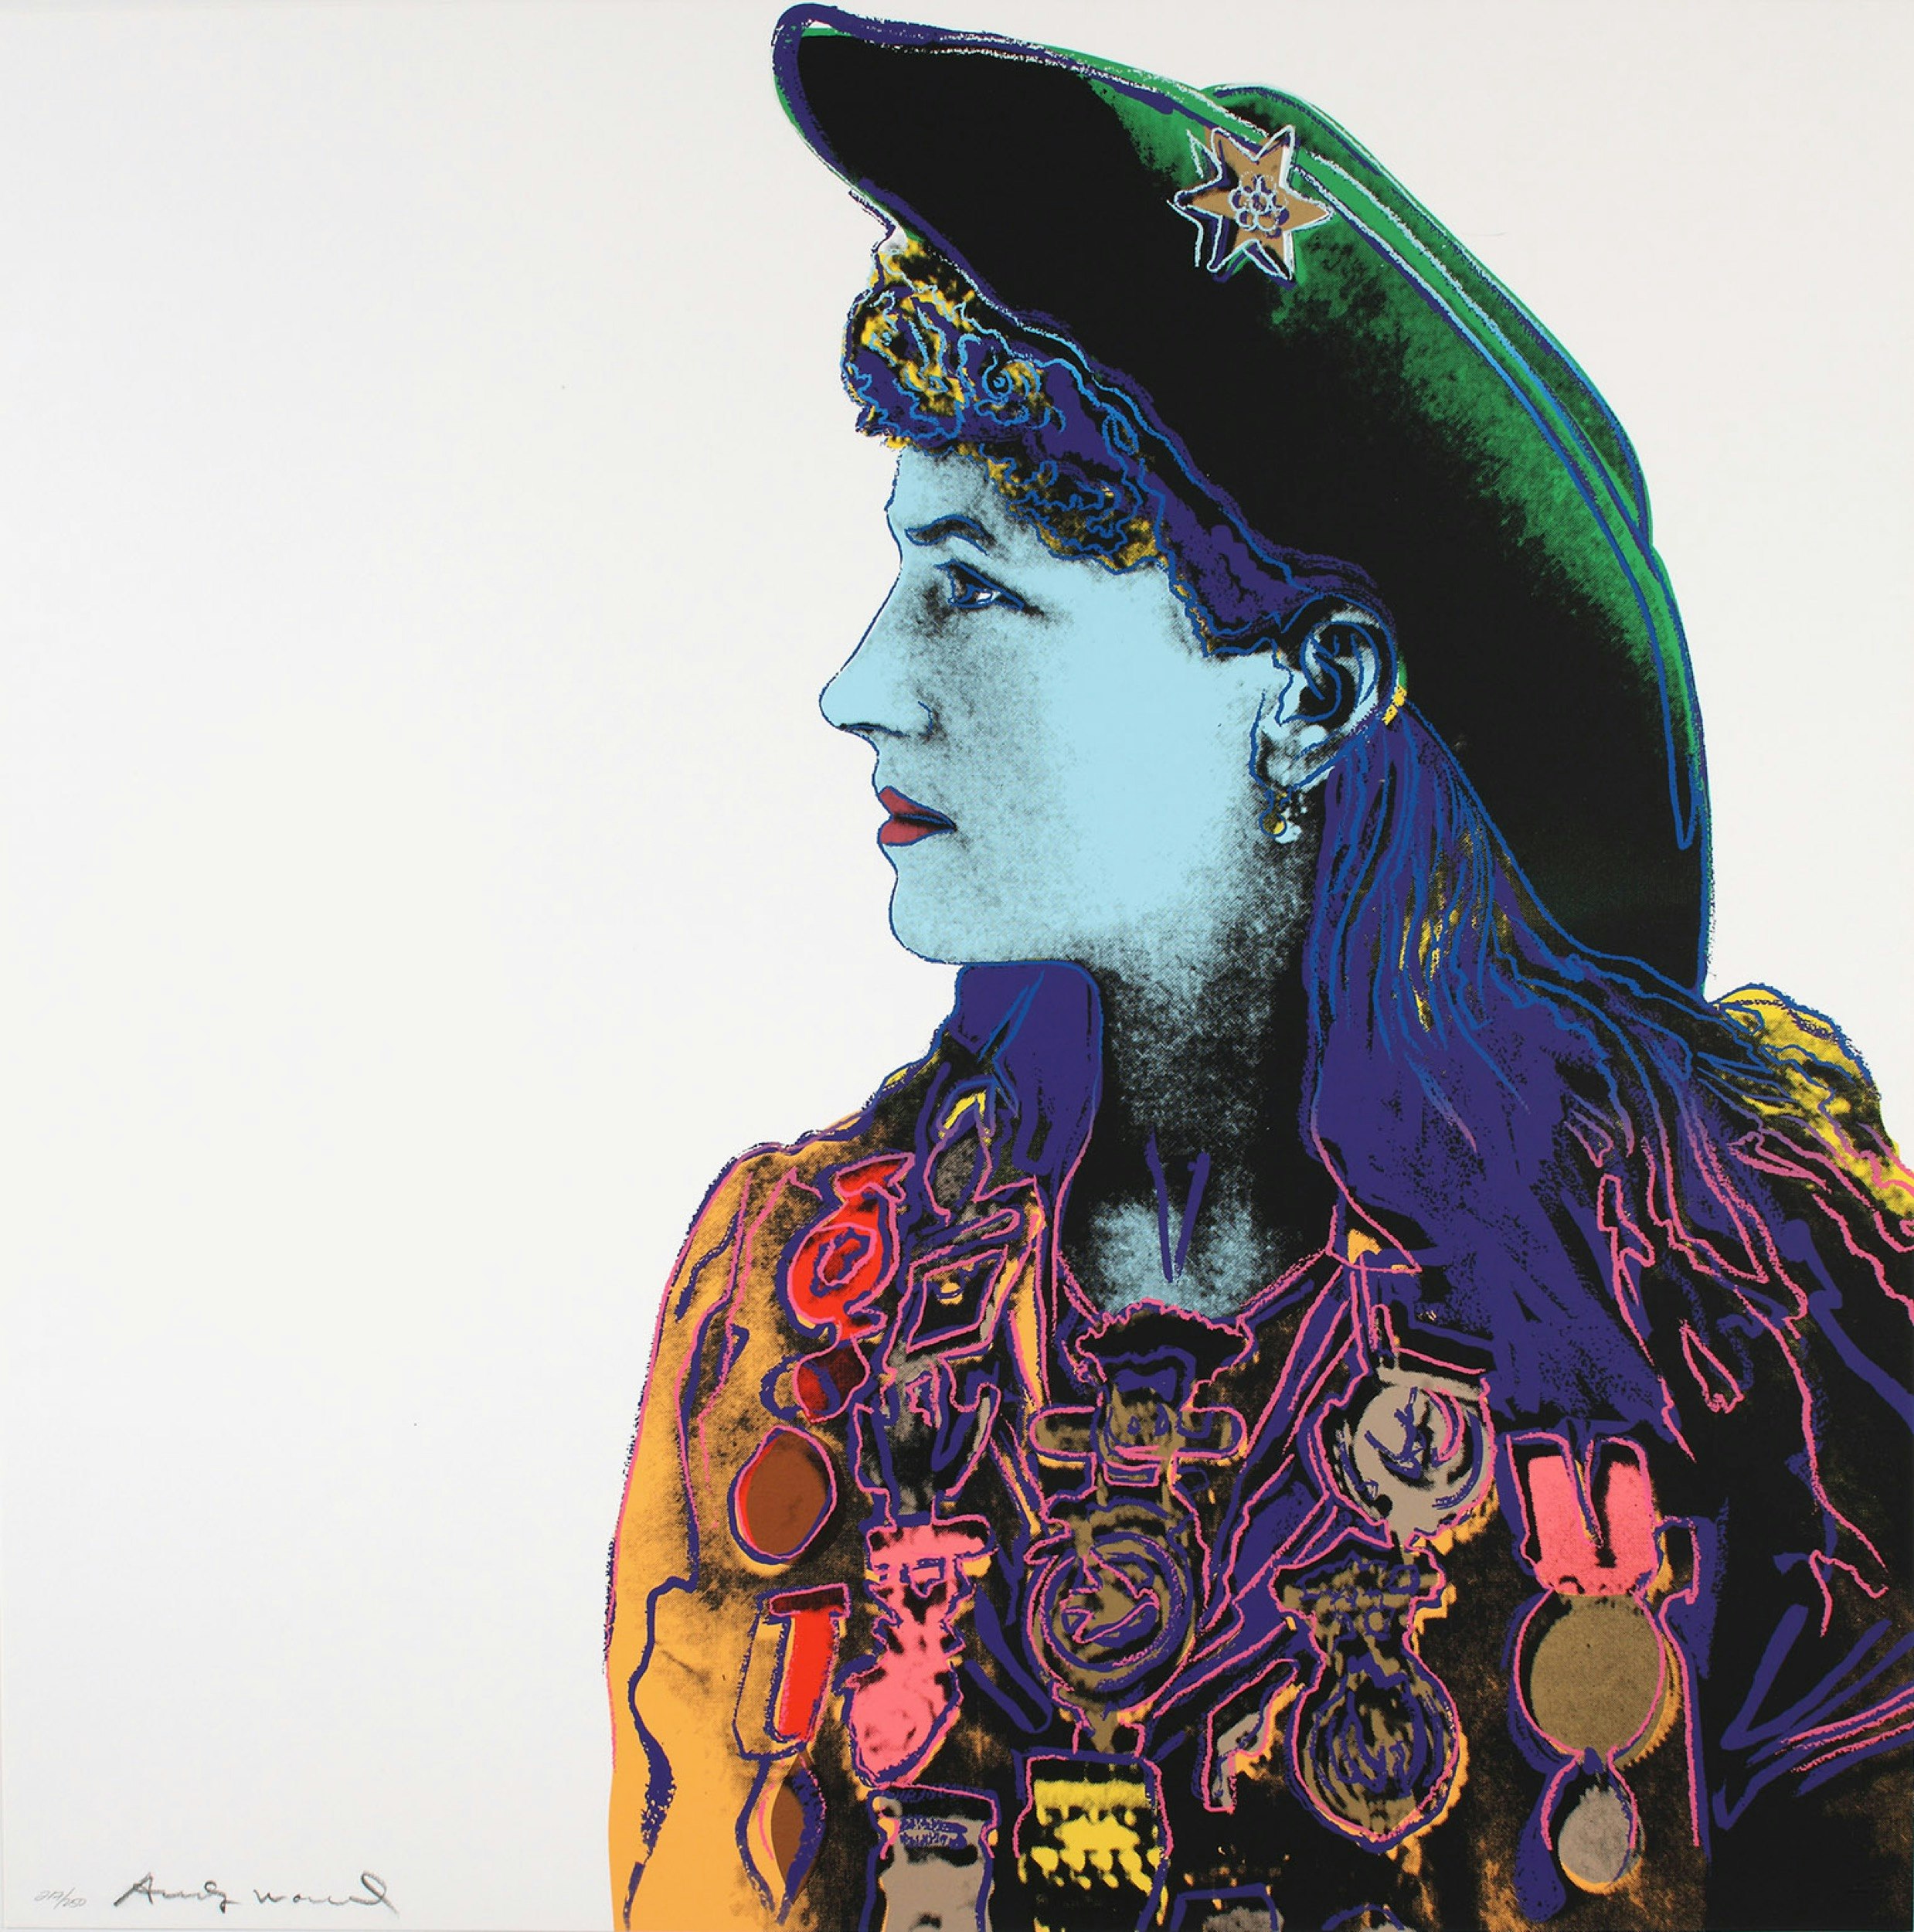 A black and white image of Annie Oakley is screen printed with colored lines and items; Andy Warhol in the US